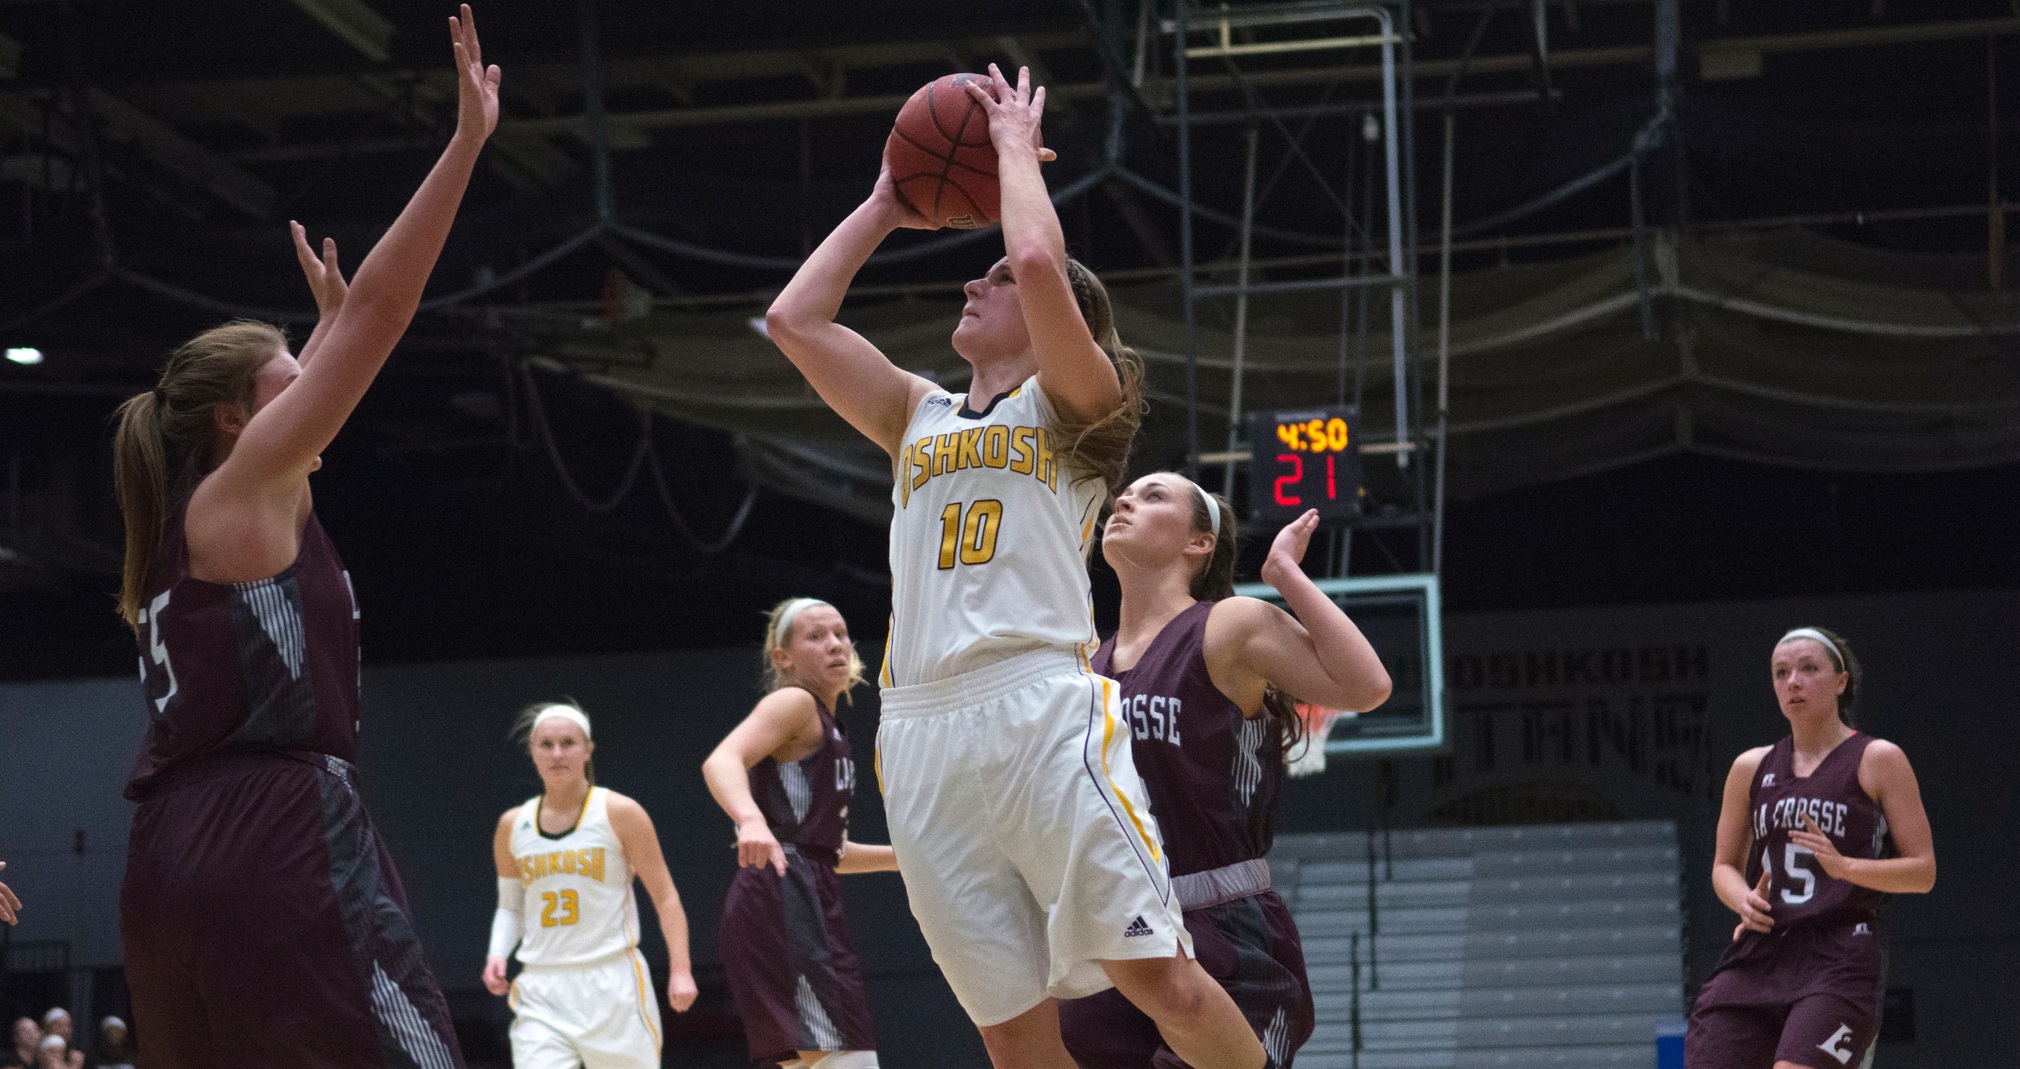 Taylor Schmidt scored the Titans' winning basket against the Eagles with 2.5 seconds left in overtime.